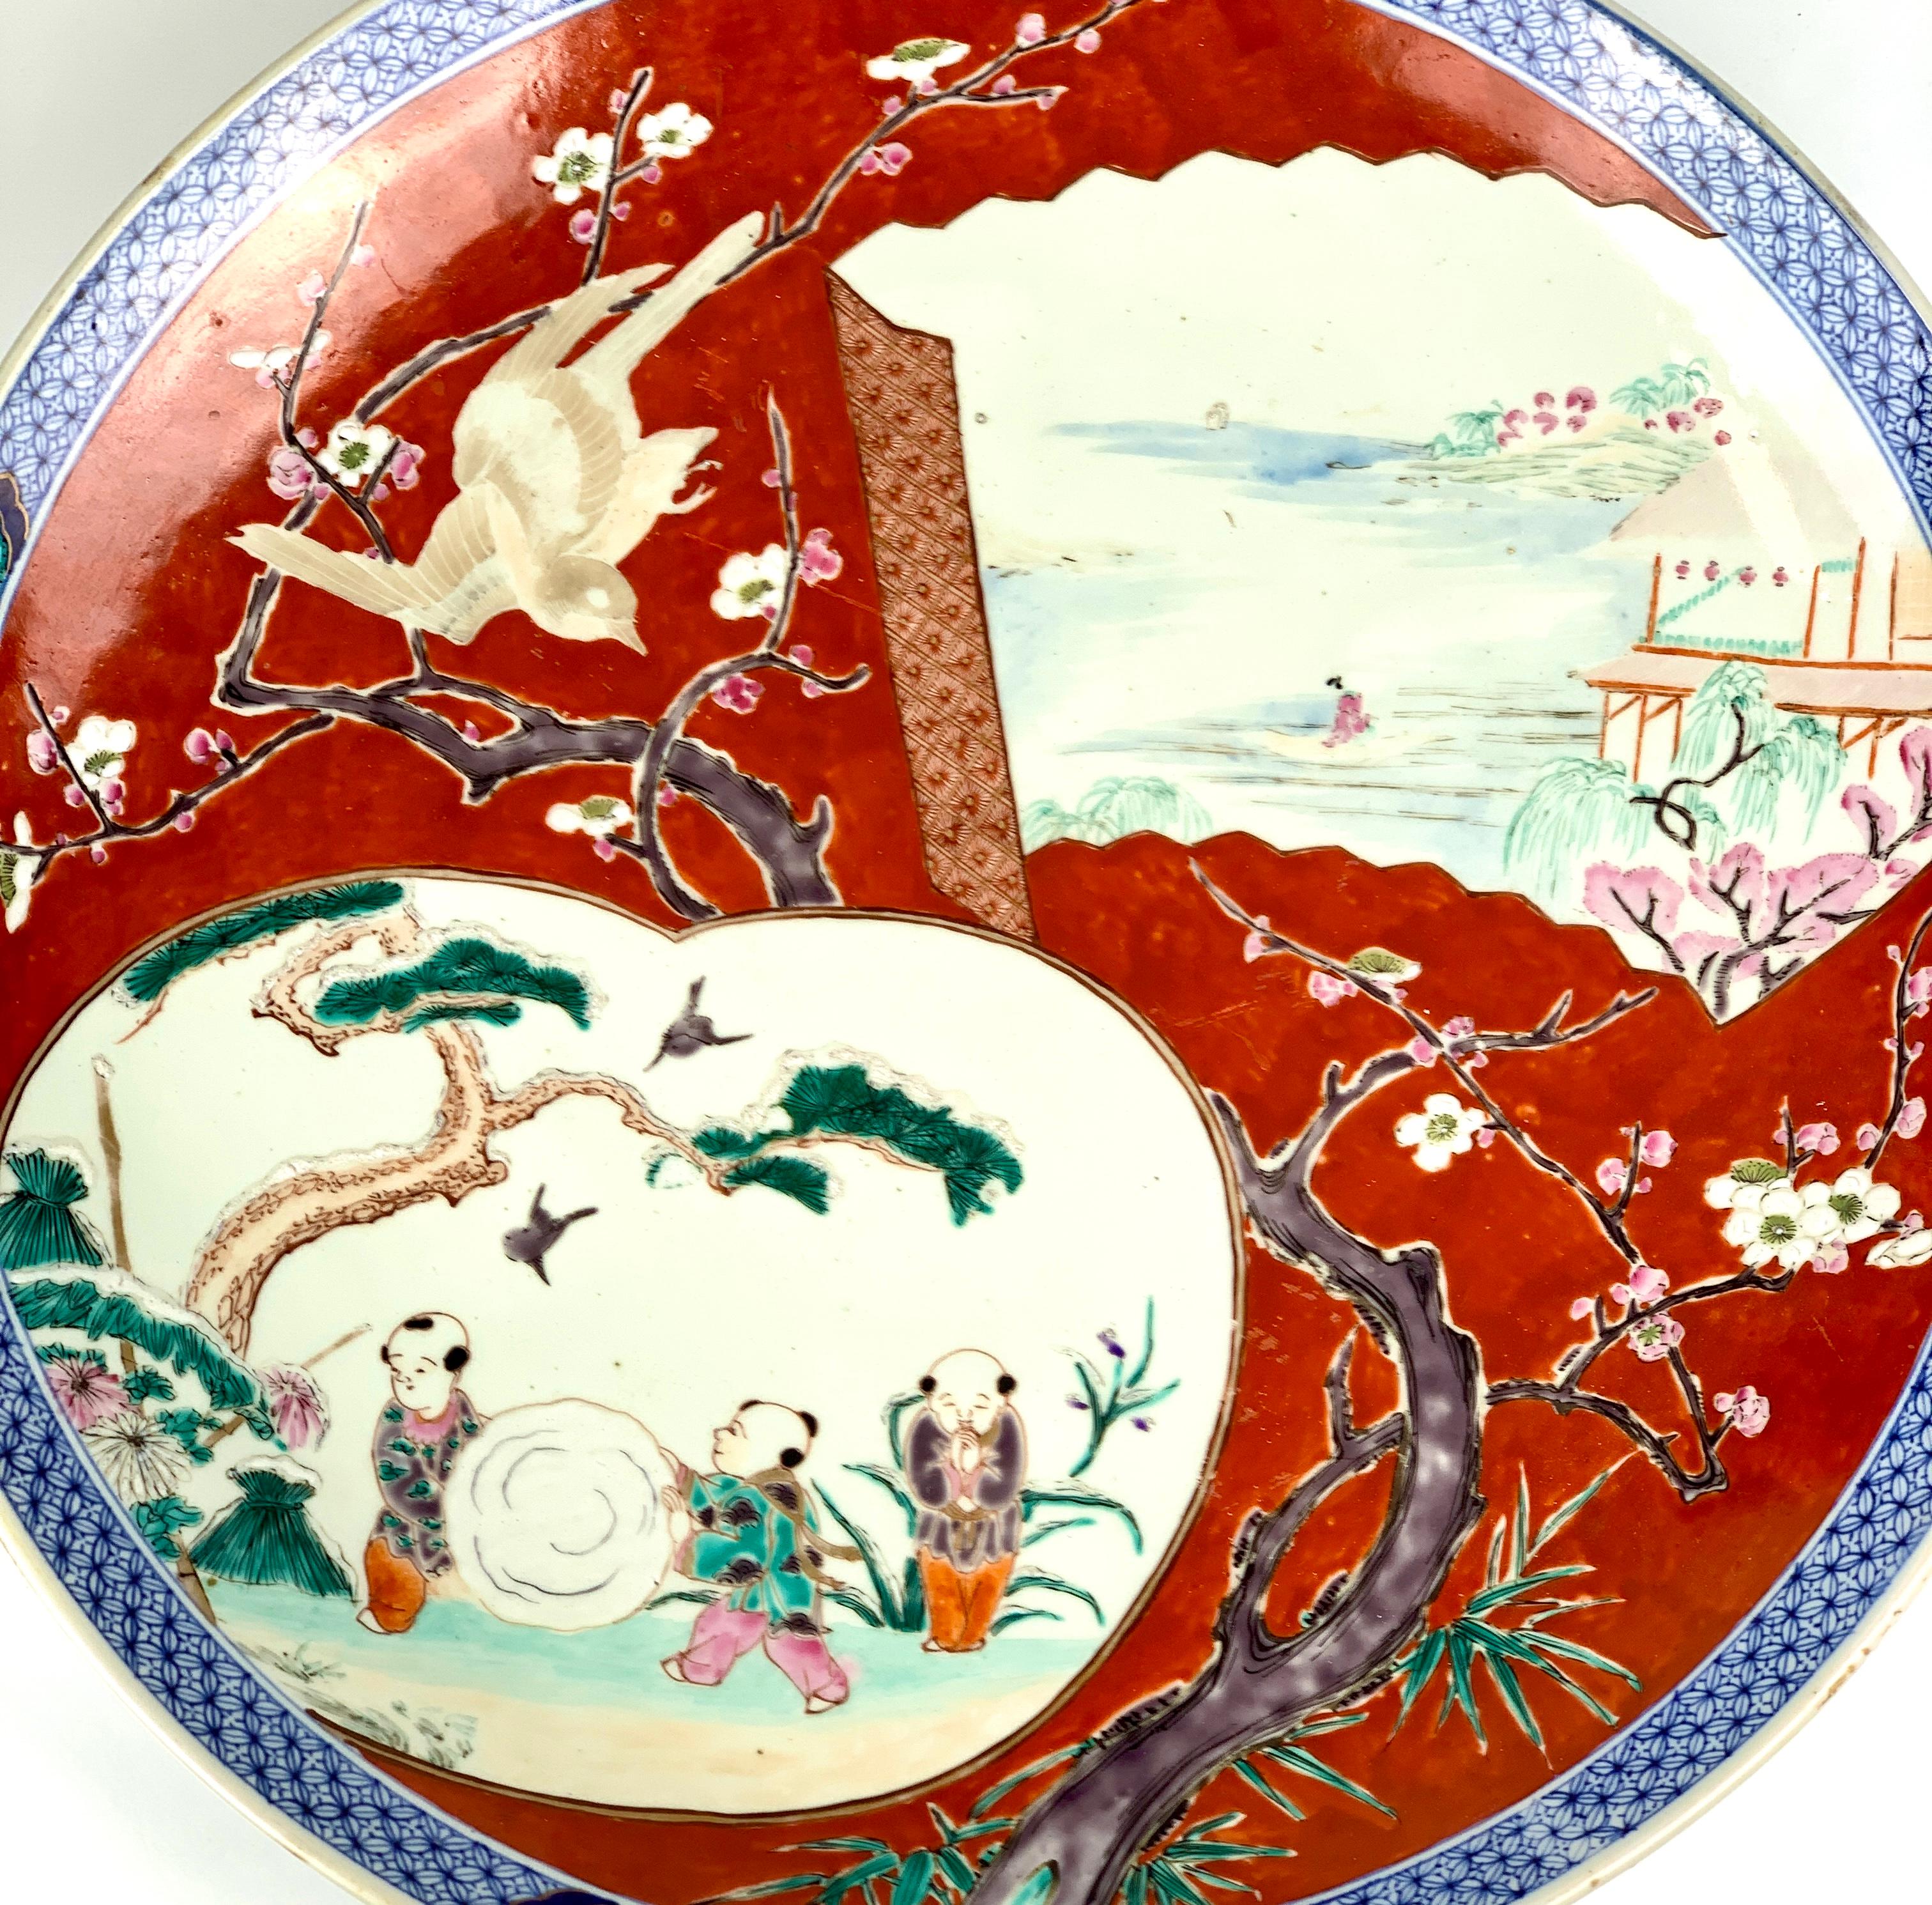 This large antique charger (18 inches in diameter) is a showpiece of Japanese decorative art. 
Made in the late 19th-century Meiji period, the intricate hand-painted design shows a delightful depiction of children at play in the snow, a charming